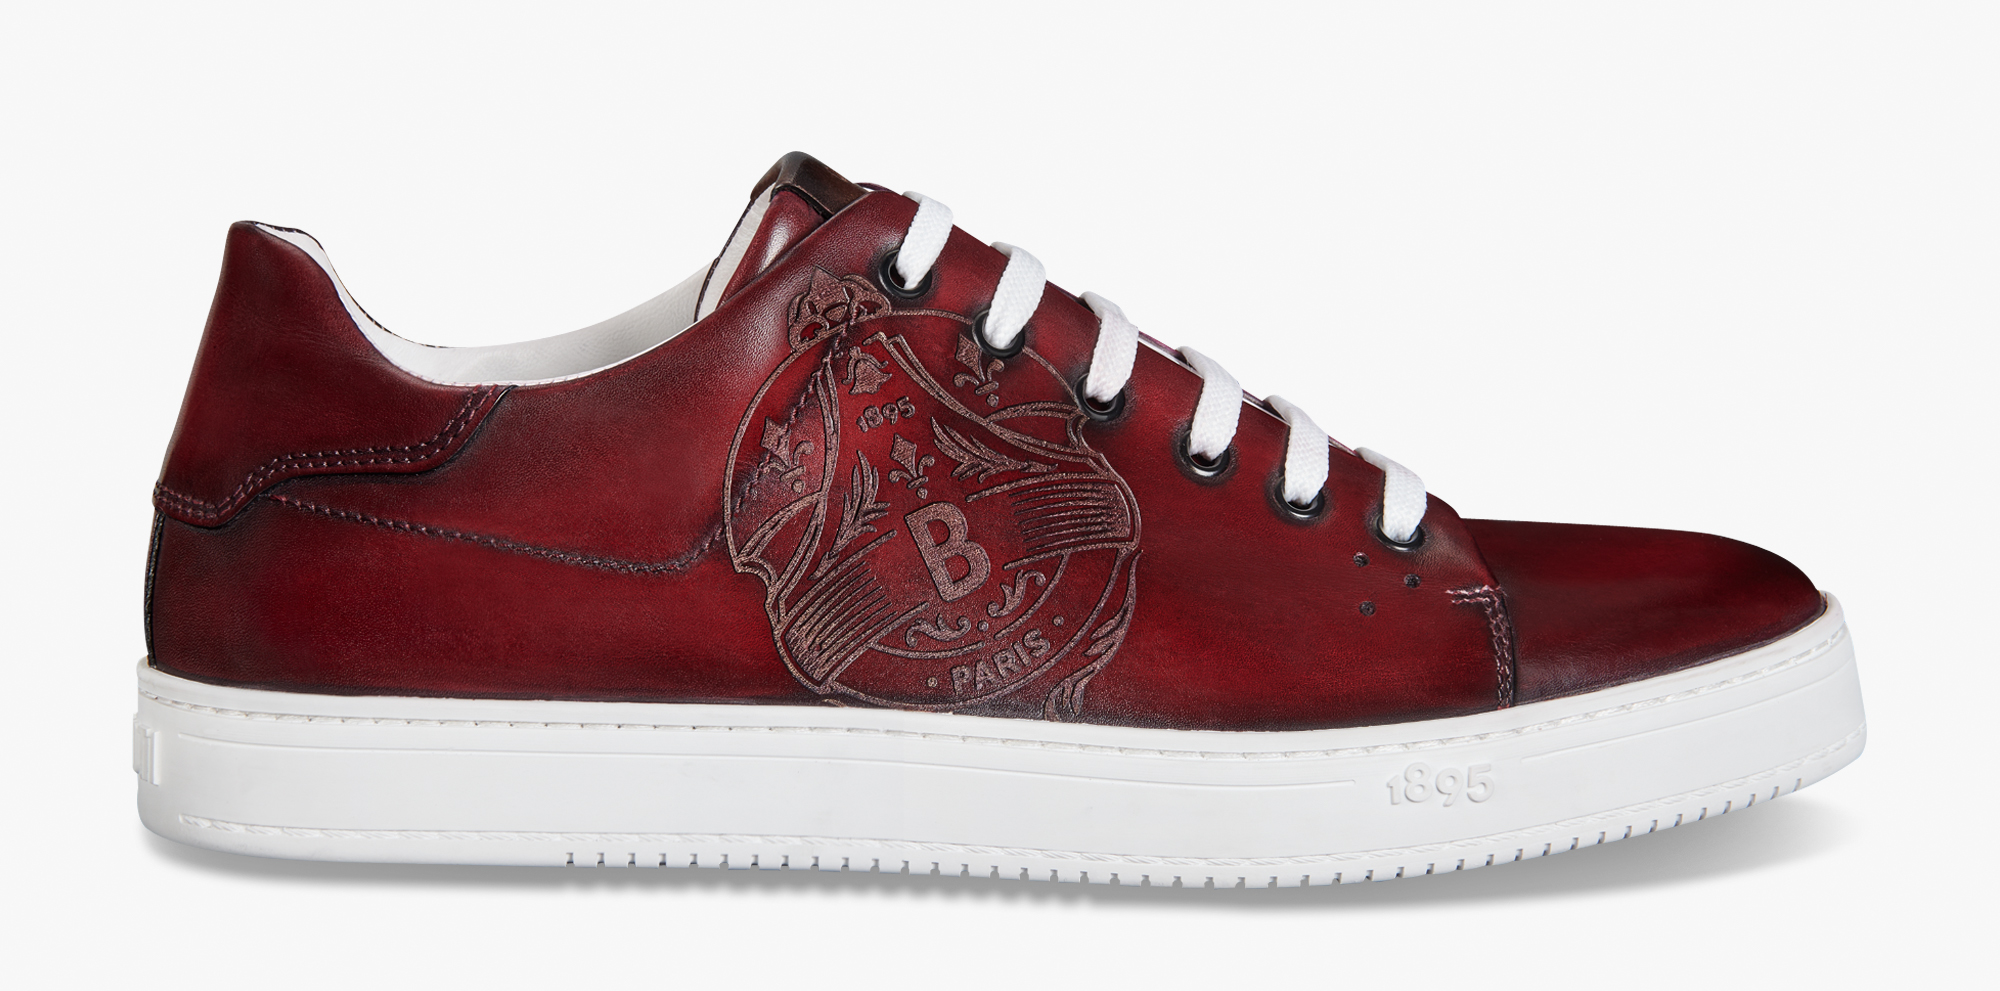 Playtime Stamp Leather Sneaker Tdm 